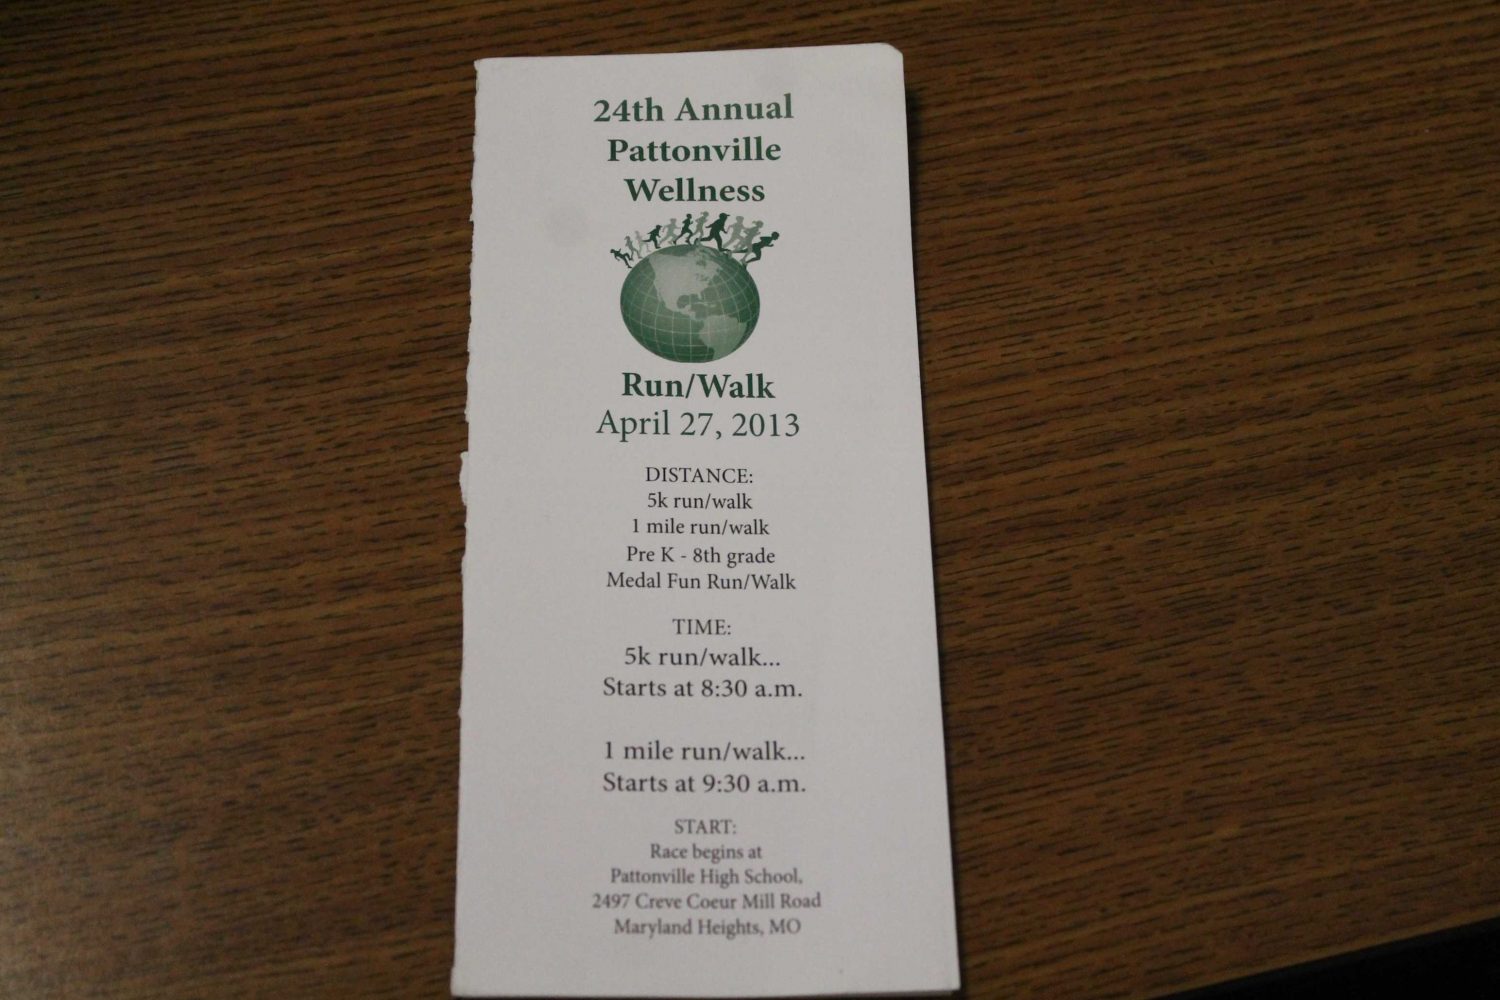 24th+Annual+Pattonville+Wellness+Run%2FWalk+to+be+held+April+27